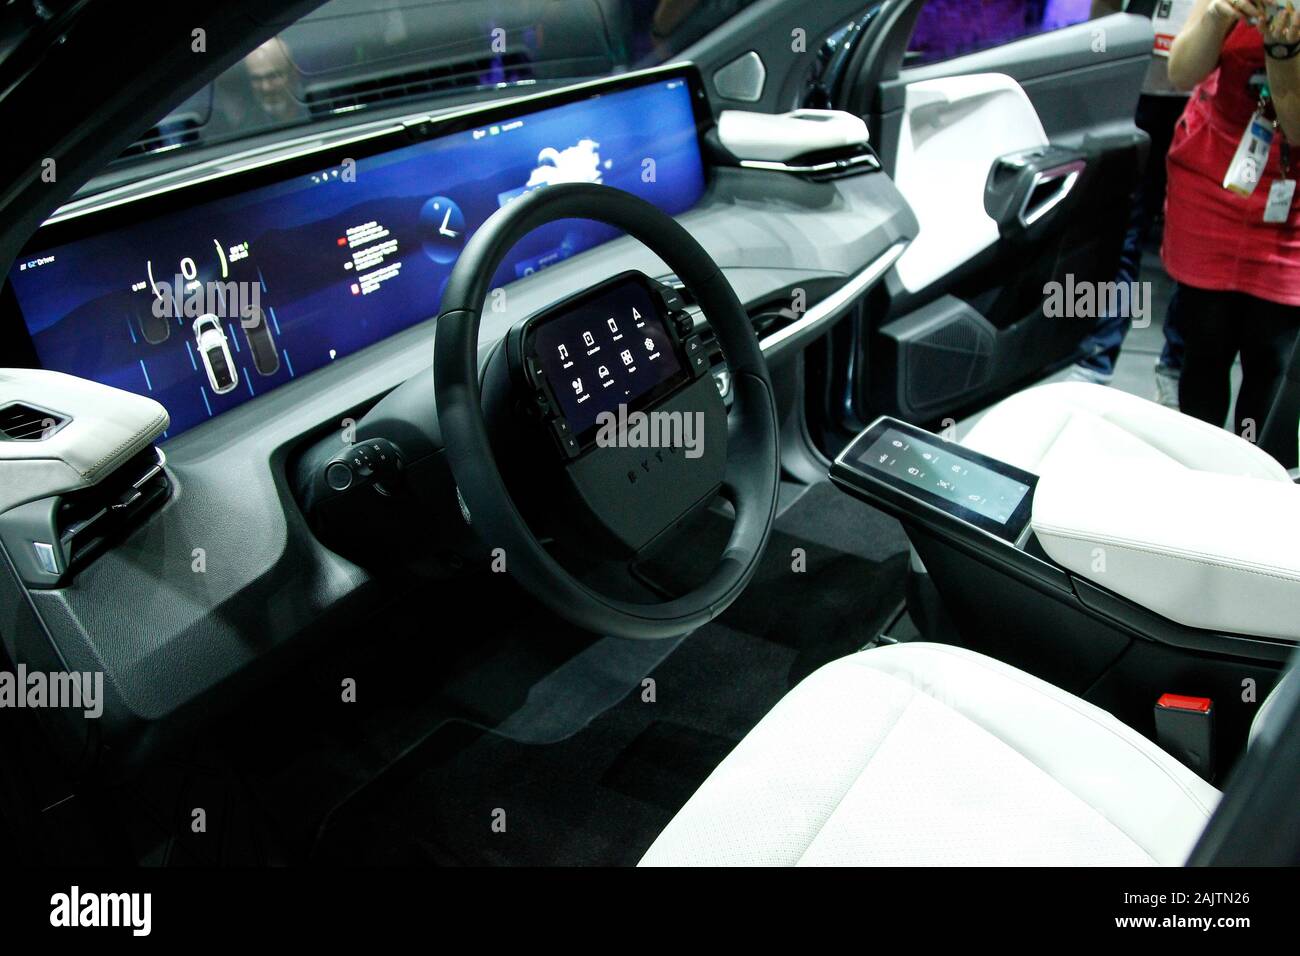 Las Vegas, United States. 05th Jan, 2020. An interior view of the 48' digial dashboard of the new production model of the M-Byte electric smart car by BYTON unveiled during the 2020 International CES, at the Mandalay Bay Convention Center in Las Vegas, Nevada on Sunday, January 5, 2020. Photo by James Atoa/UPI Credit: UPI/Alamy Live News Stock Photo